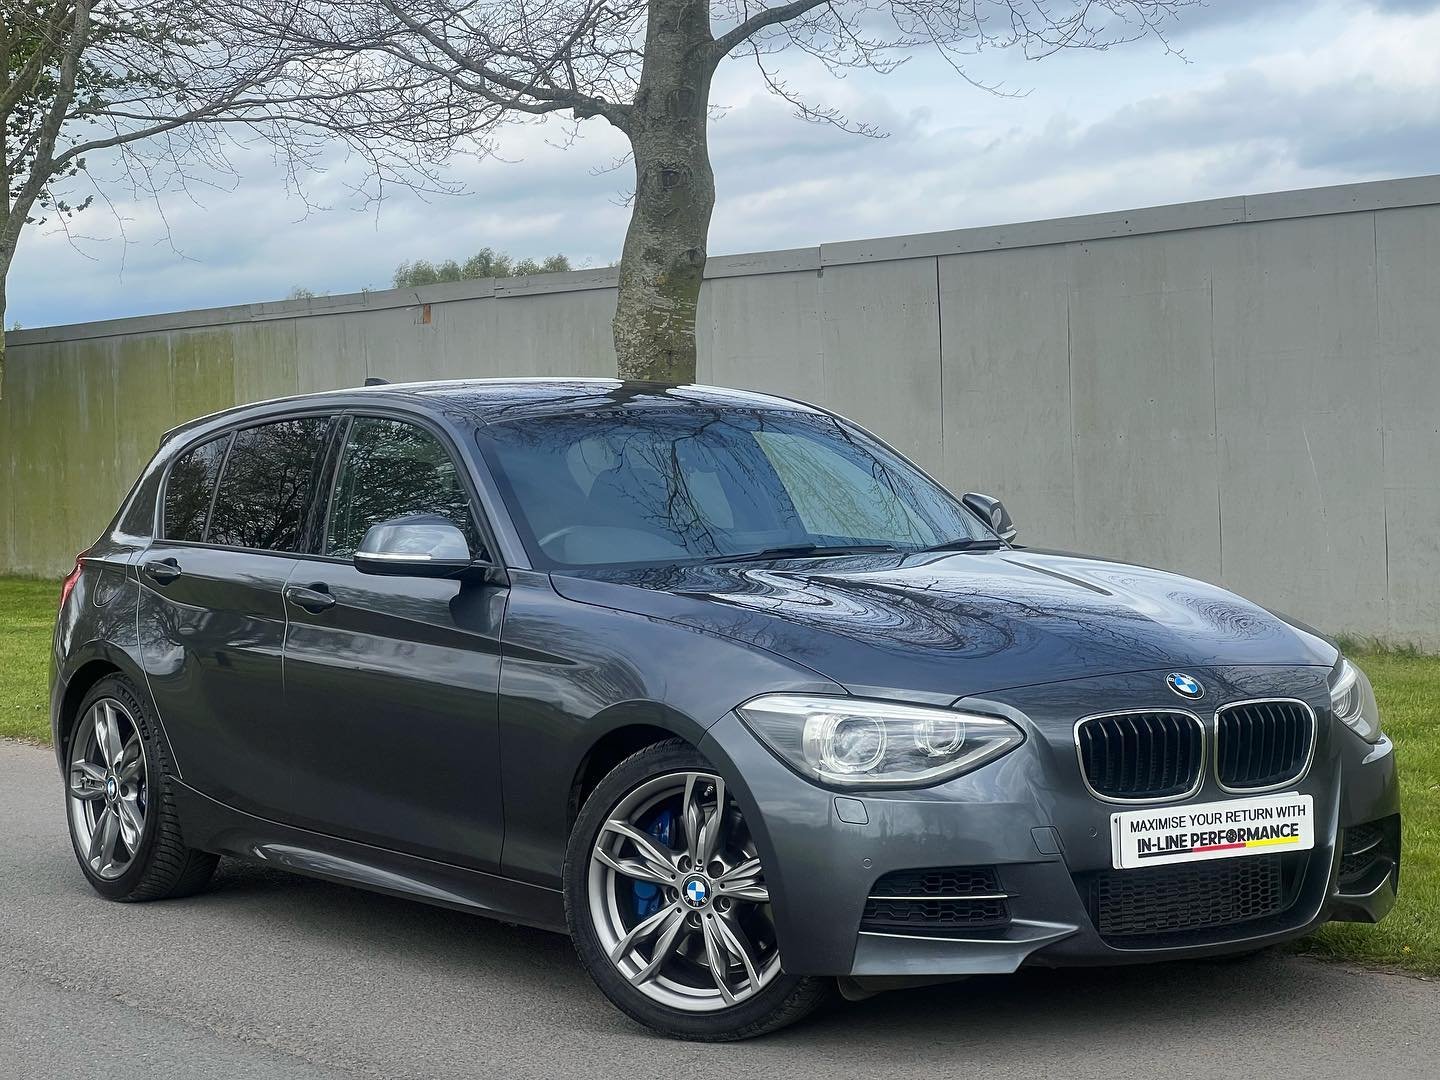 Here At IN-LINE PERFORMANCE We Take Pride And Joy Into Supplying You With Great Quality Of The Best Of Performance Engineering. We Are Proud To Present To You This Huge Spec 2015 BMW M135I Finished In A Desirable Mineral Grey With Black Dokota Leathe